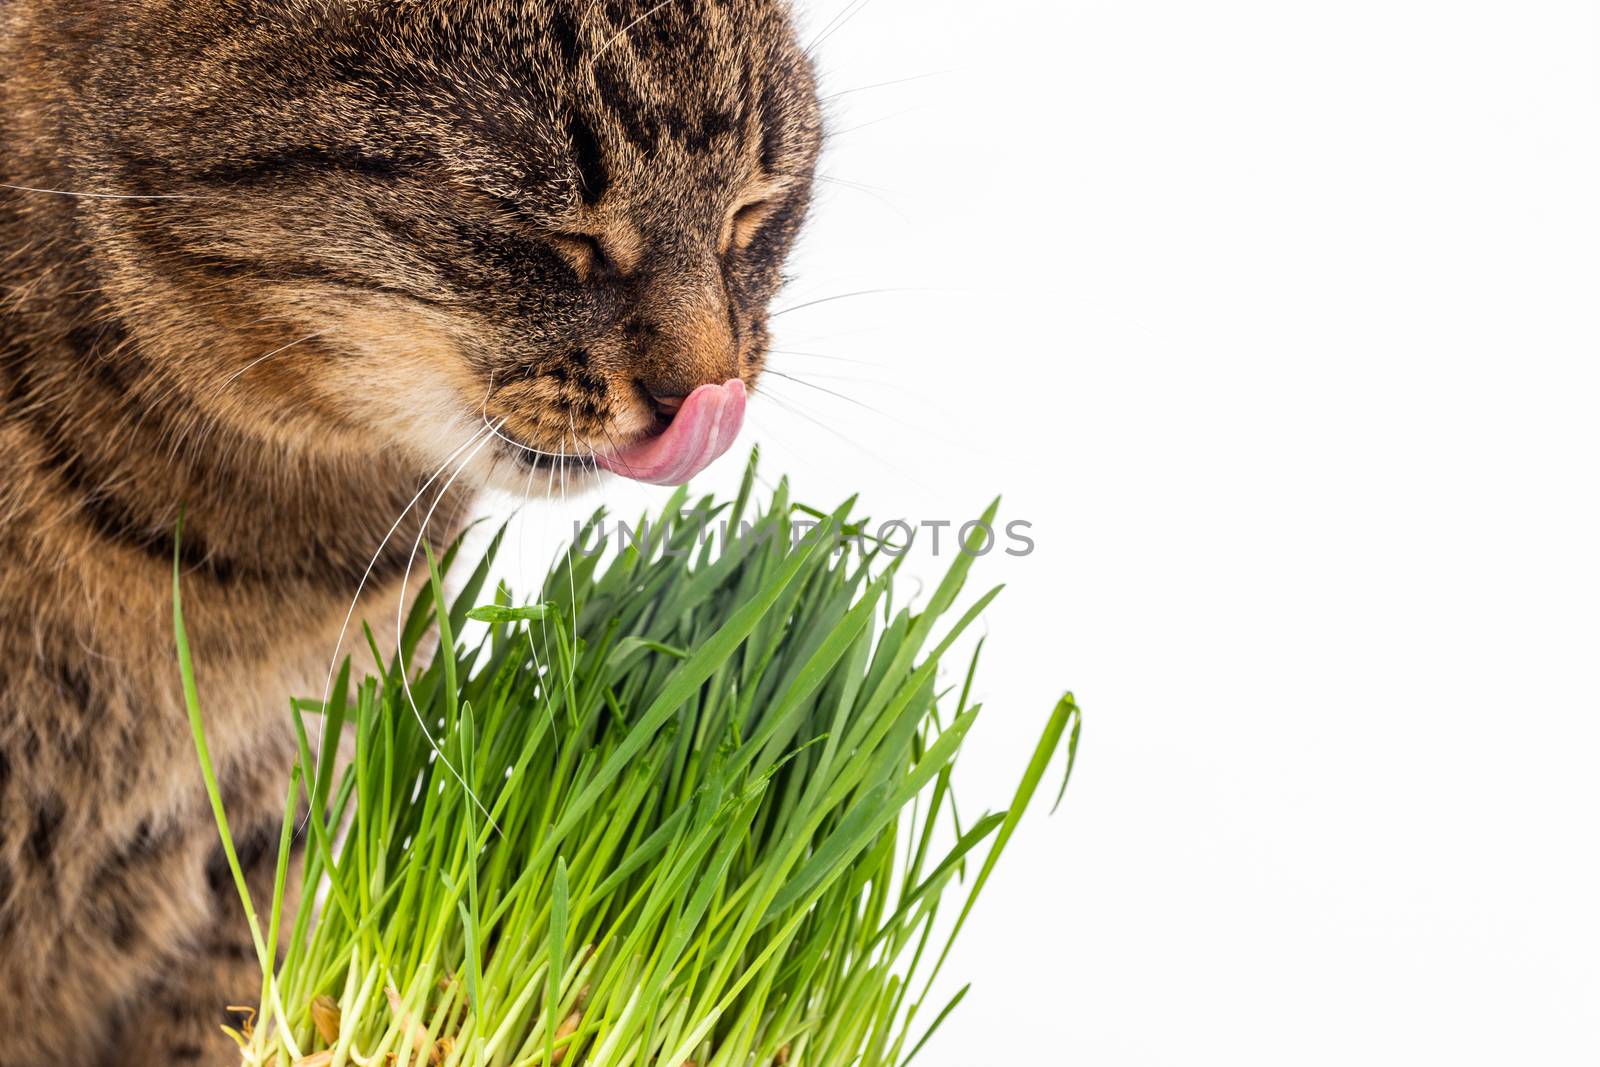 gray domestic tabby cat eating fresh green oats sprouts close-up on white background with selective focus and blur by z1b